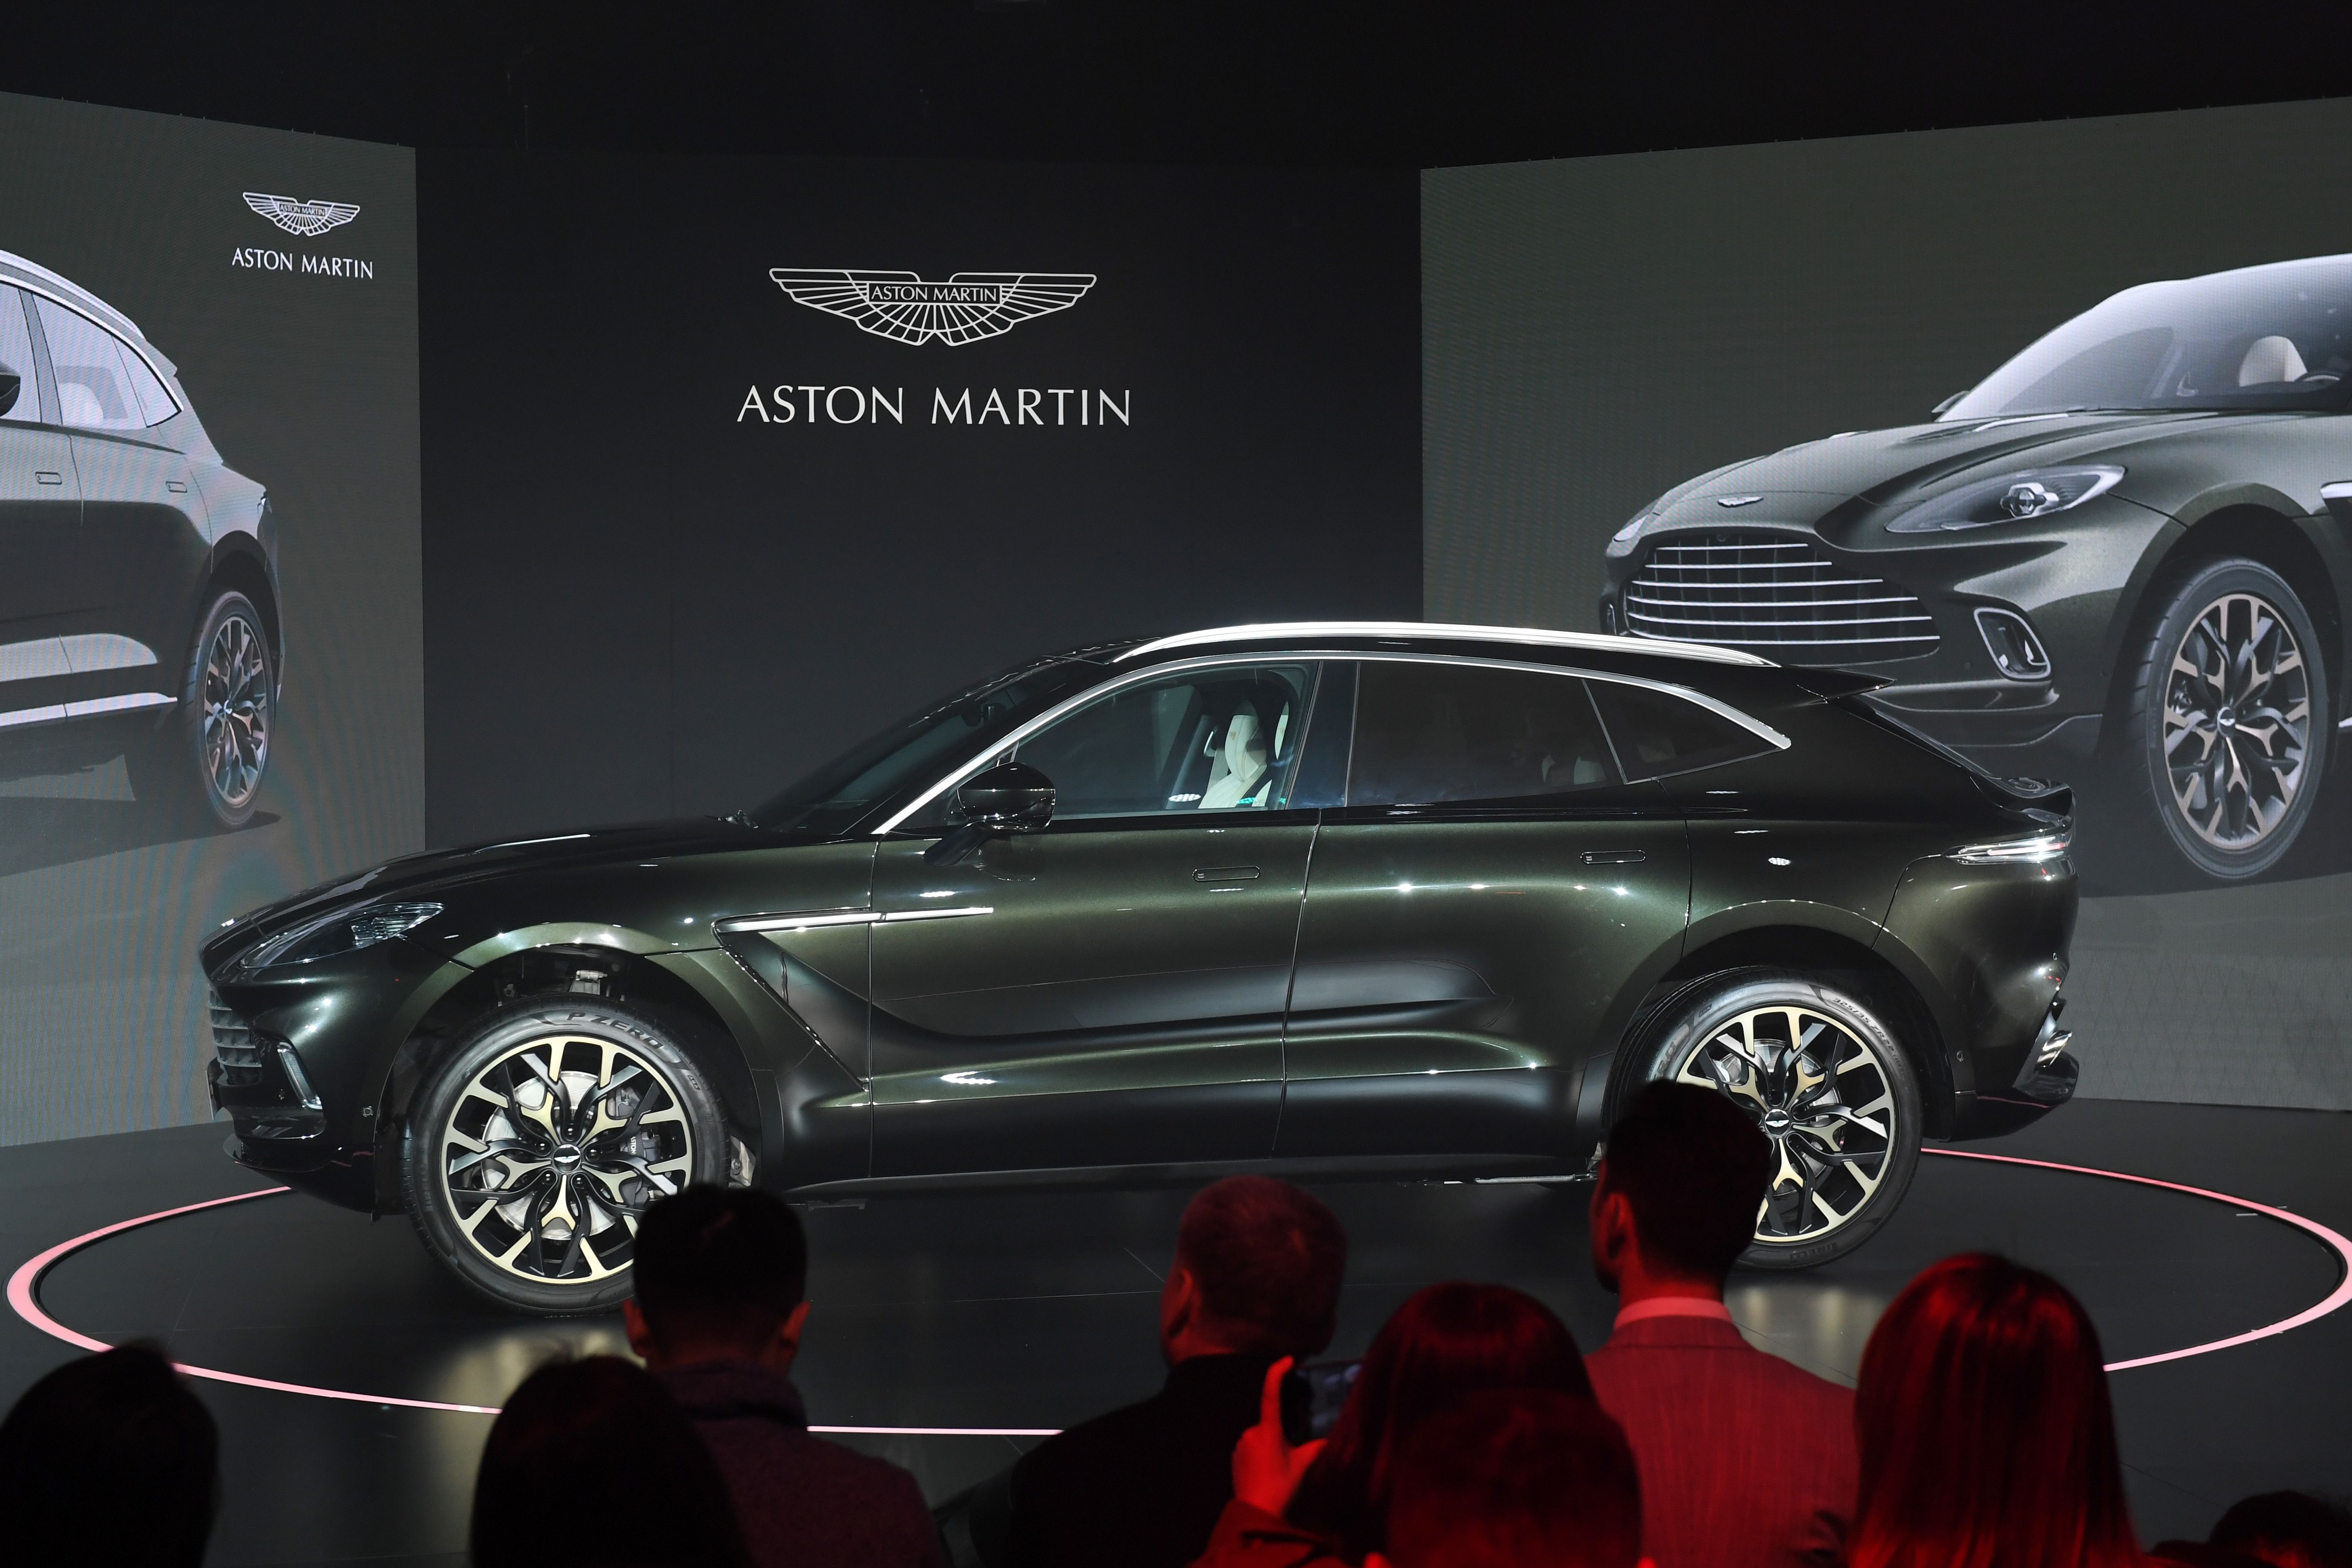 Aston Martin&#039;s DBX SUV is seen at its world premiere in Beijing on November 20, 2019. - Aston Martin launched its first ever SUV in the Chinese capital on November 20. (Photo by GREG BAKER / 